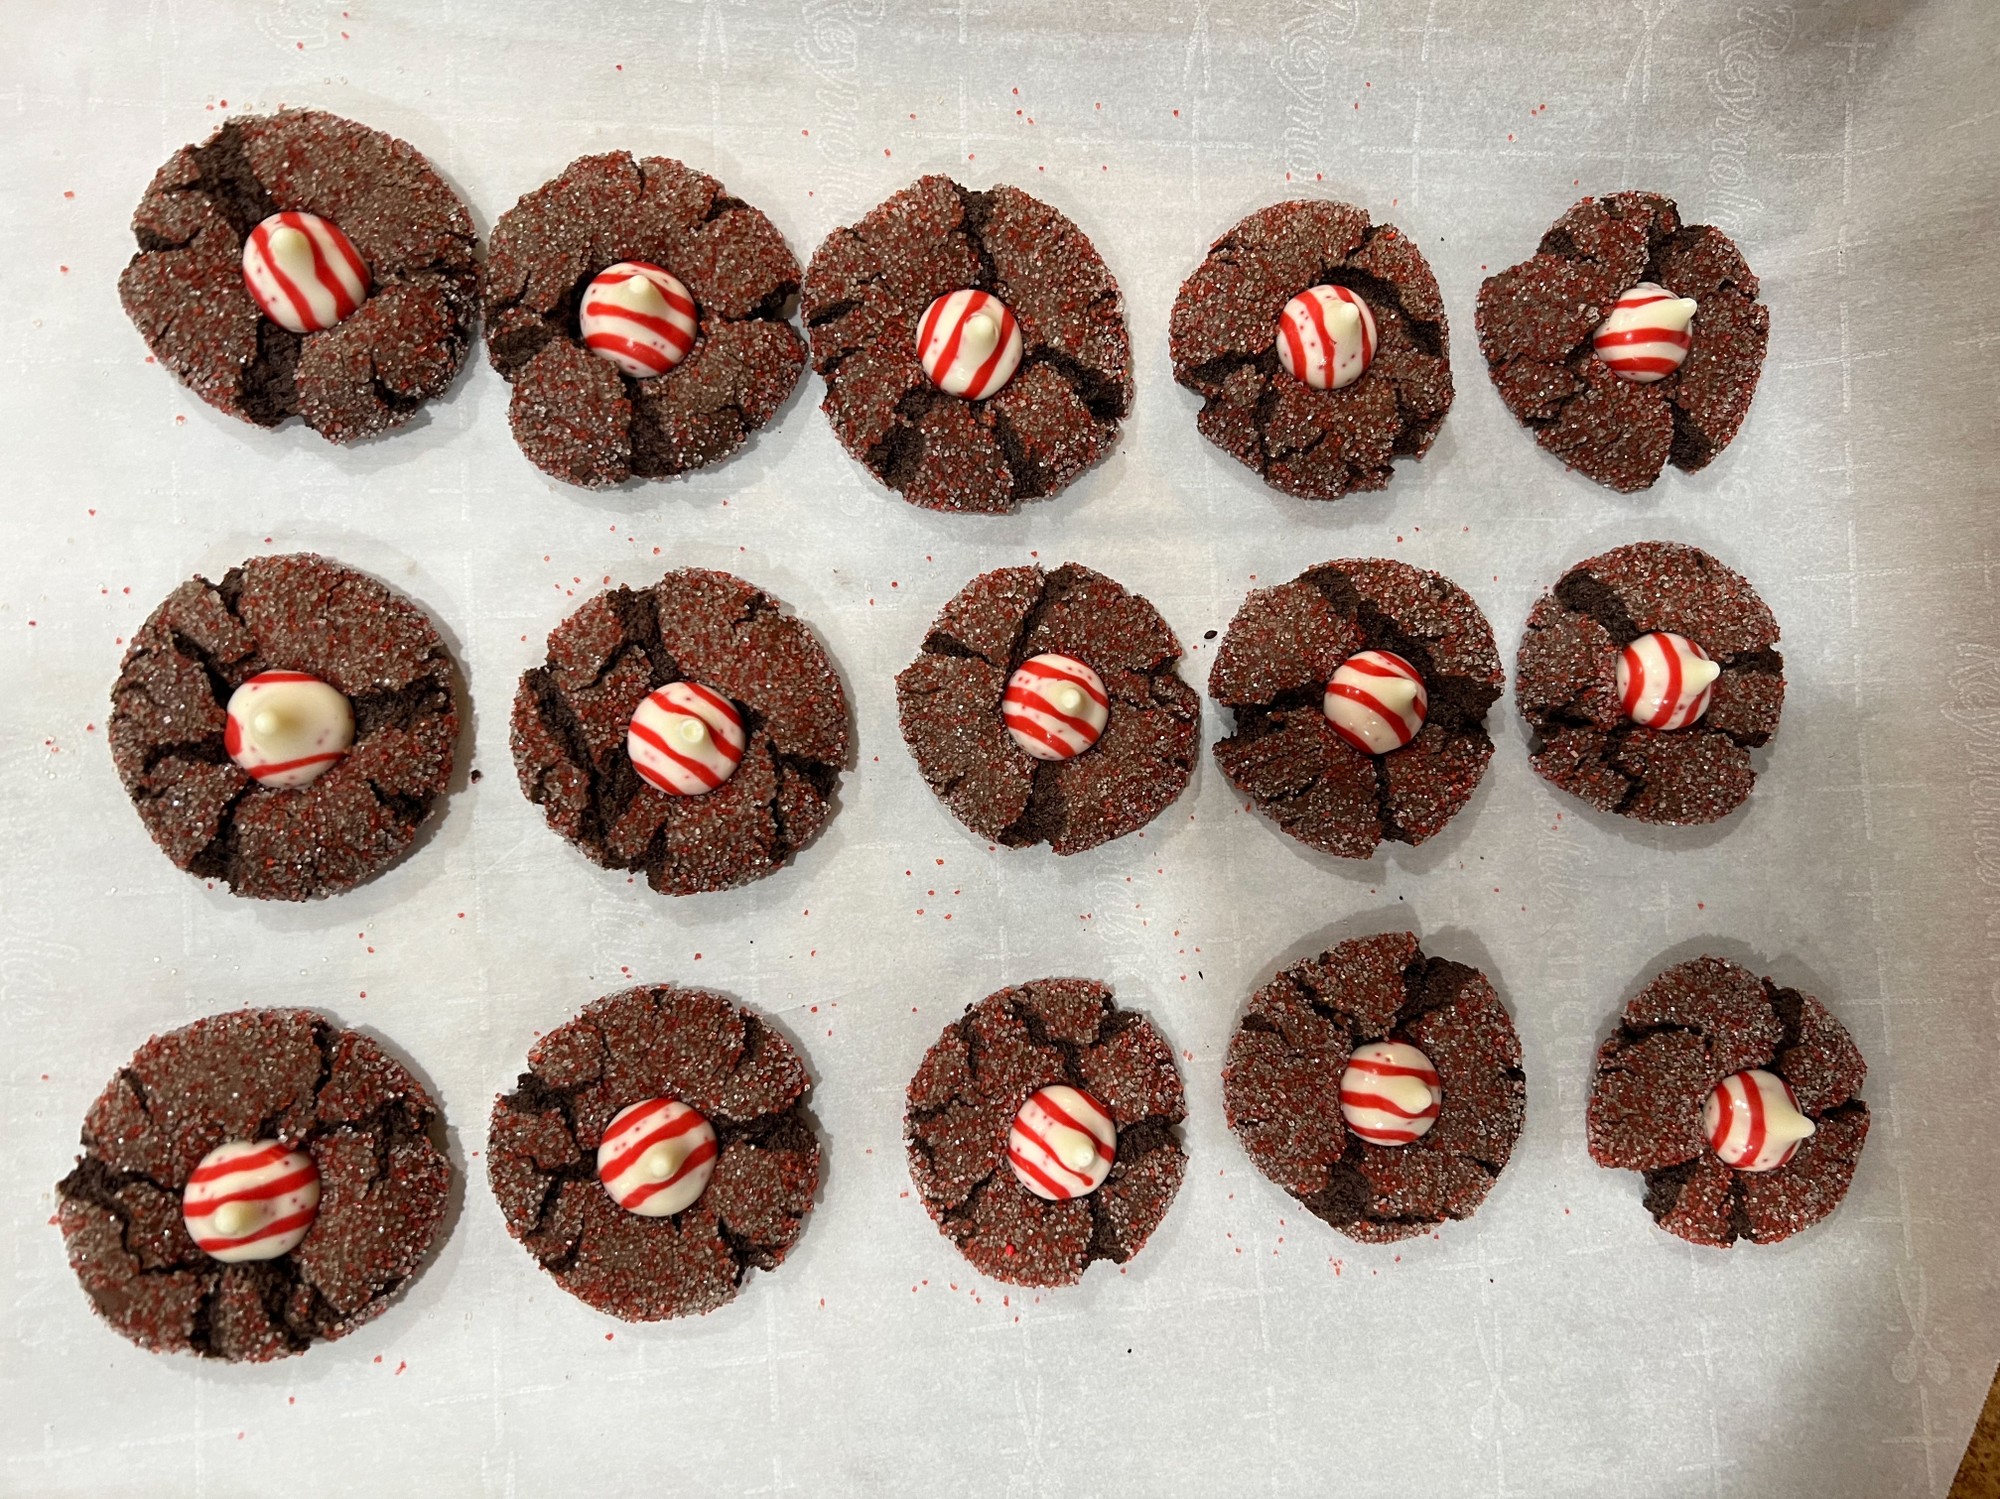 Peppermint and chocolate are one of the best flavor combinations for the holidays. Samantha Bailey | The Montclarion